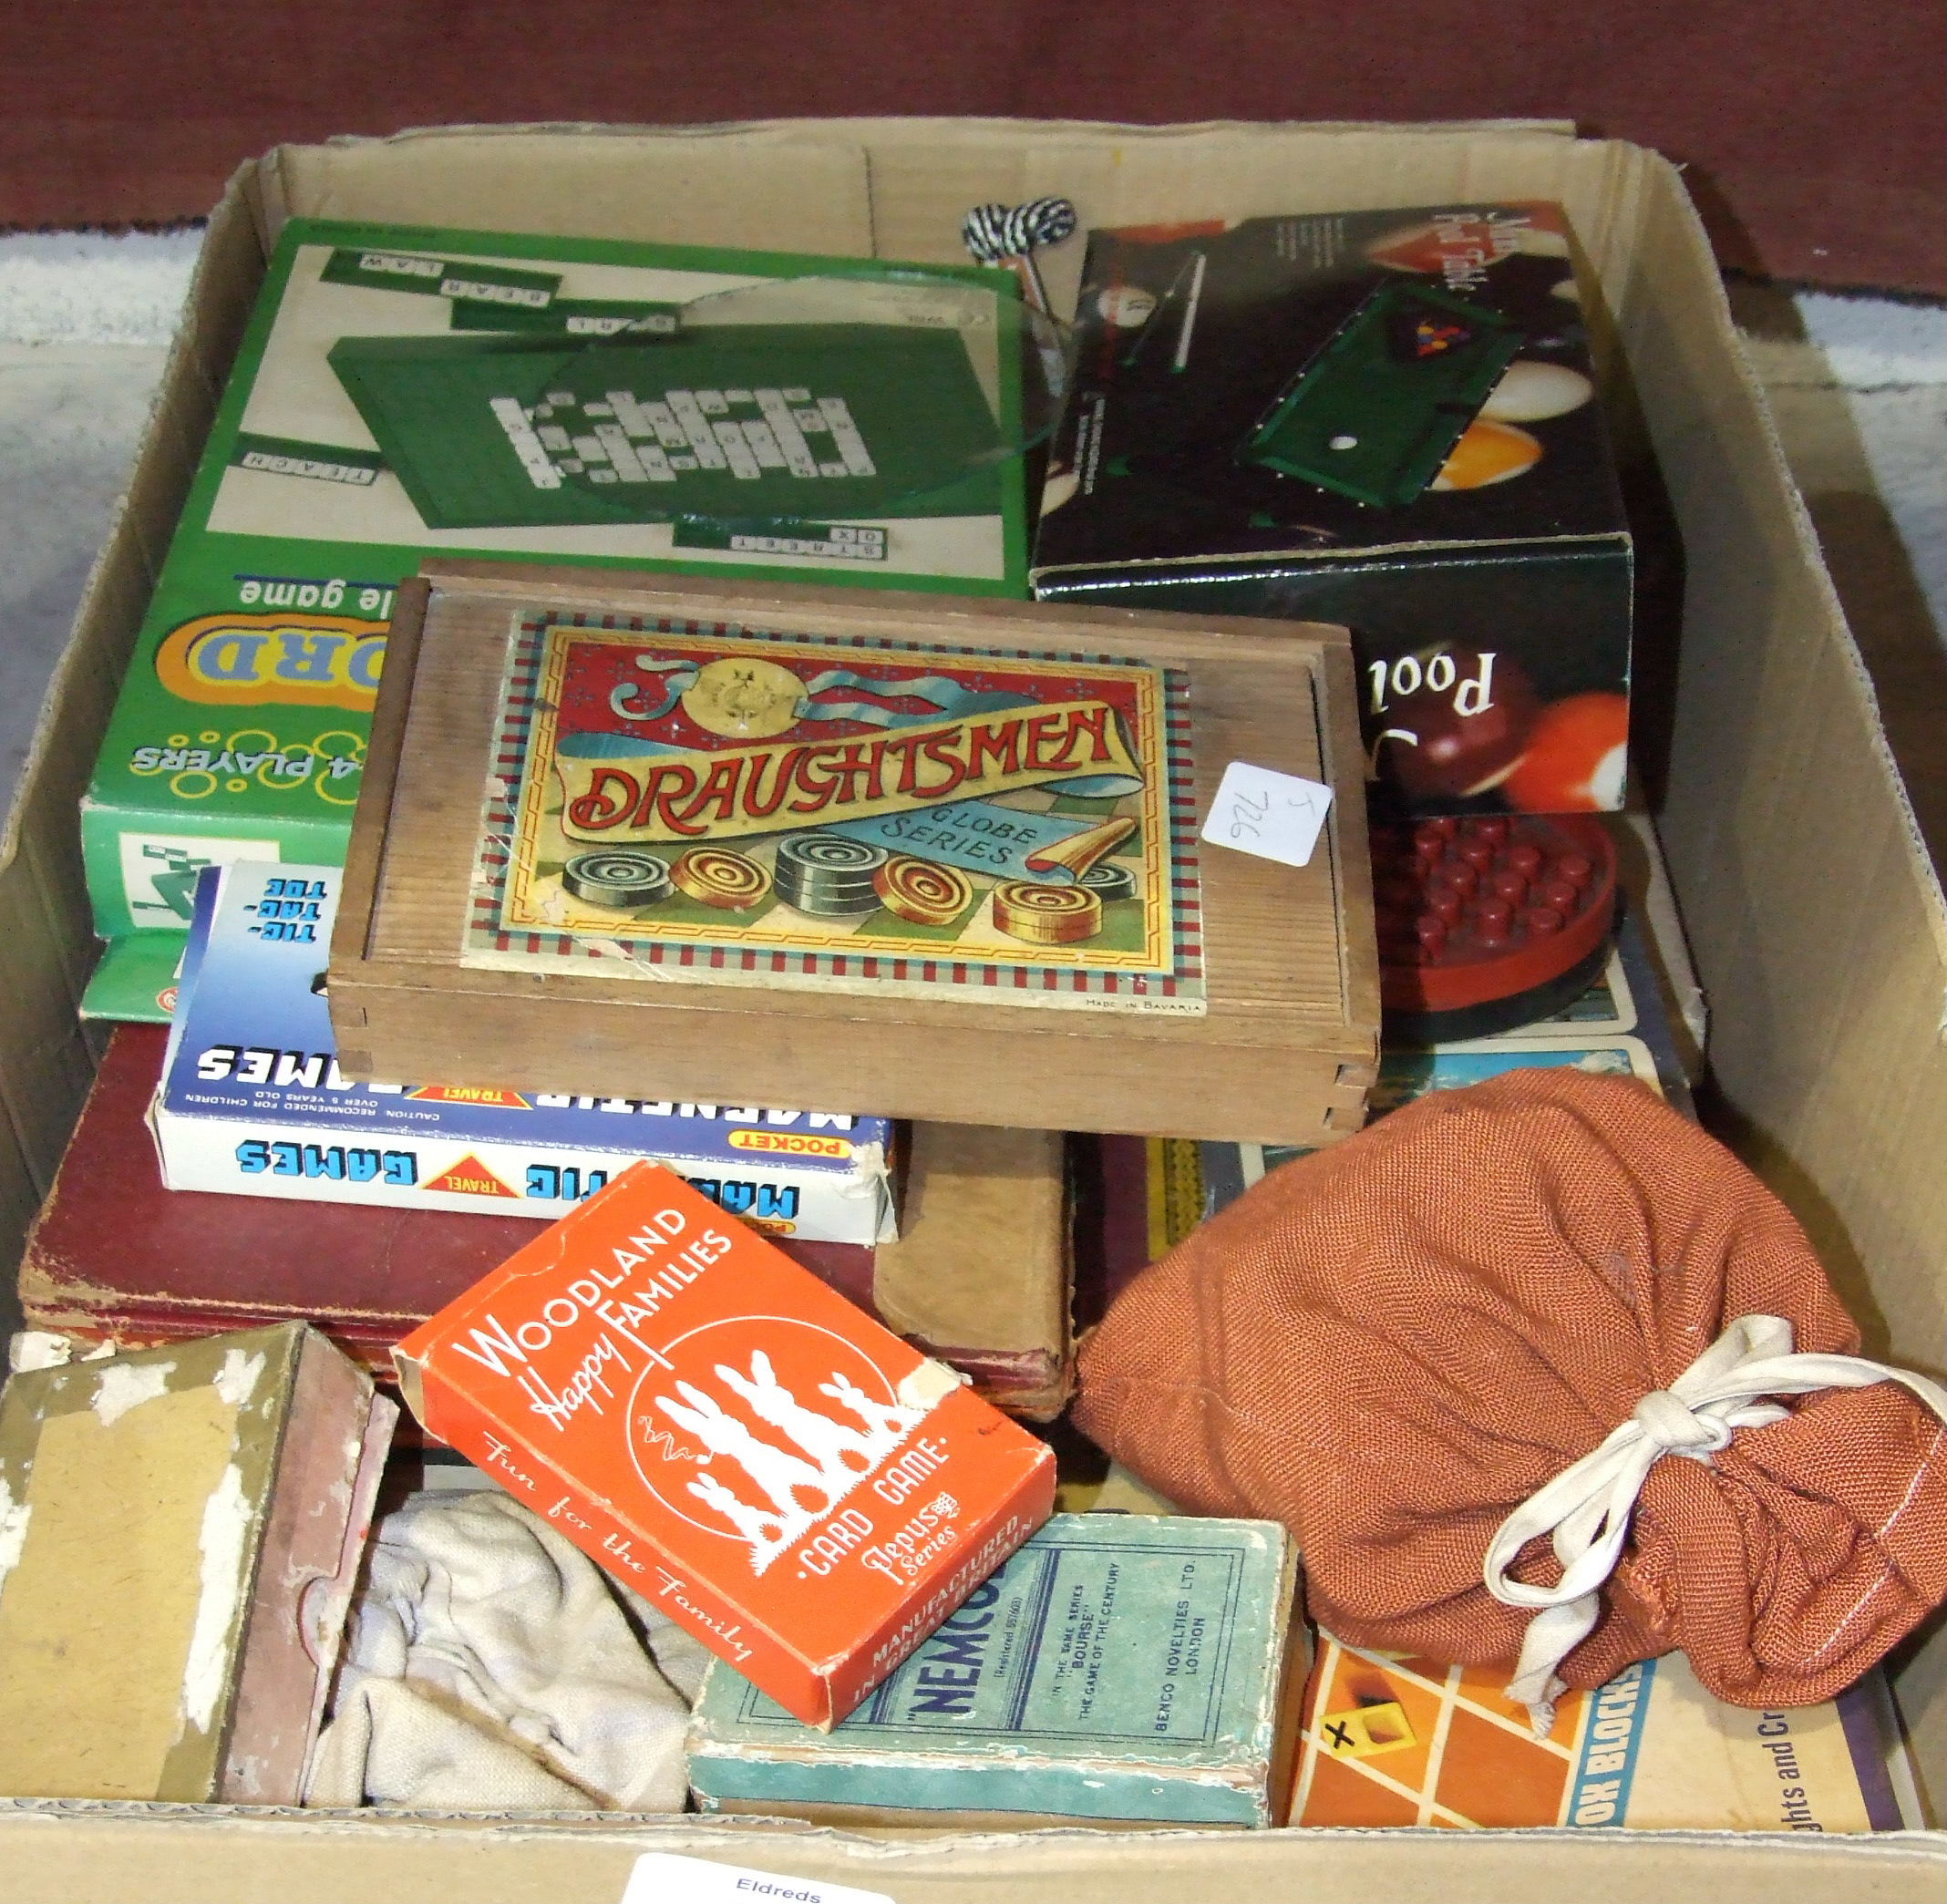 A Viewmaster with slides in original plastic case, a Brownie box camera, board games and other - Image 2 of 2